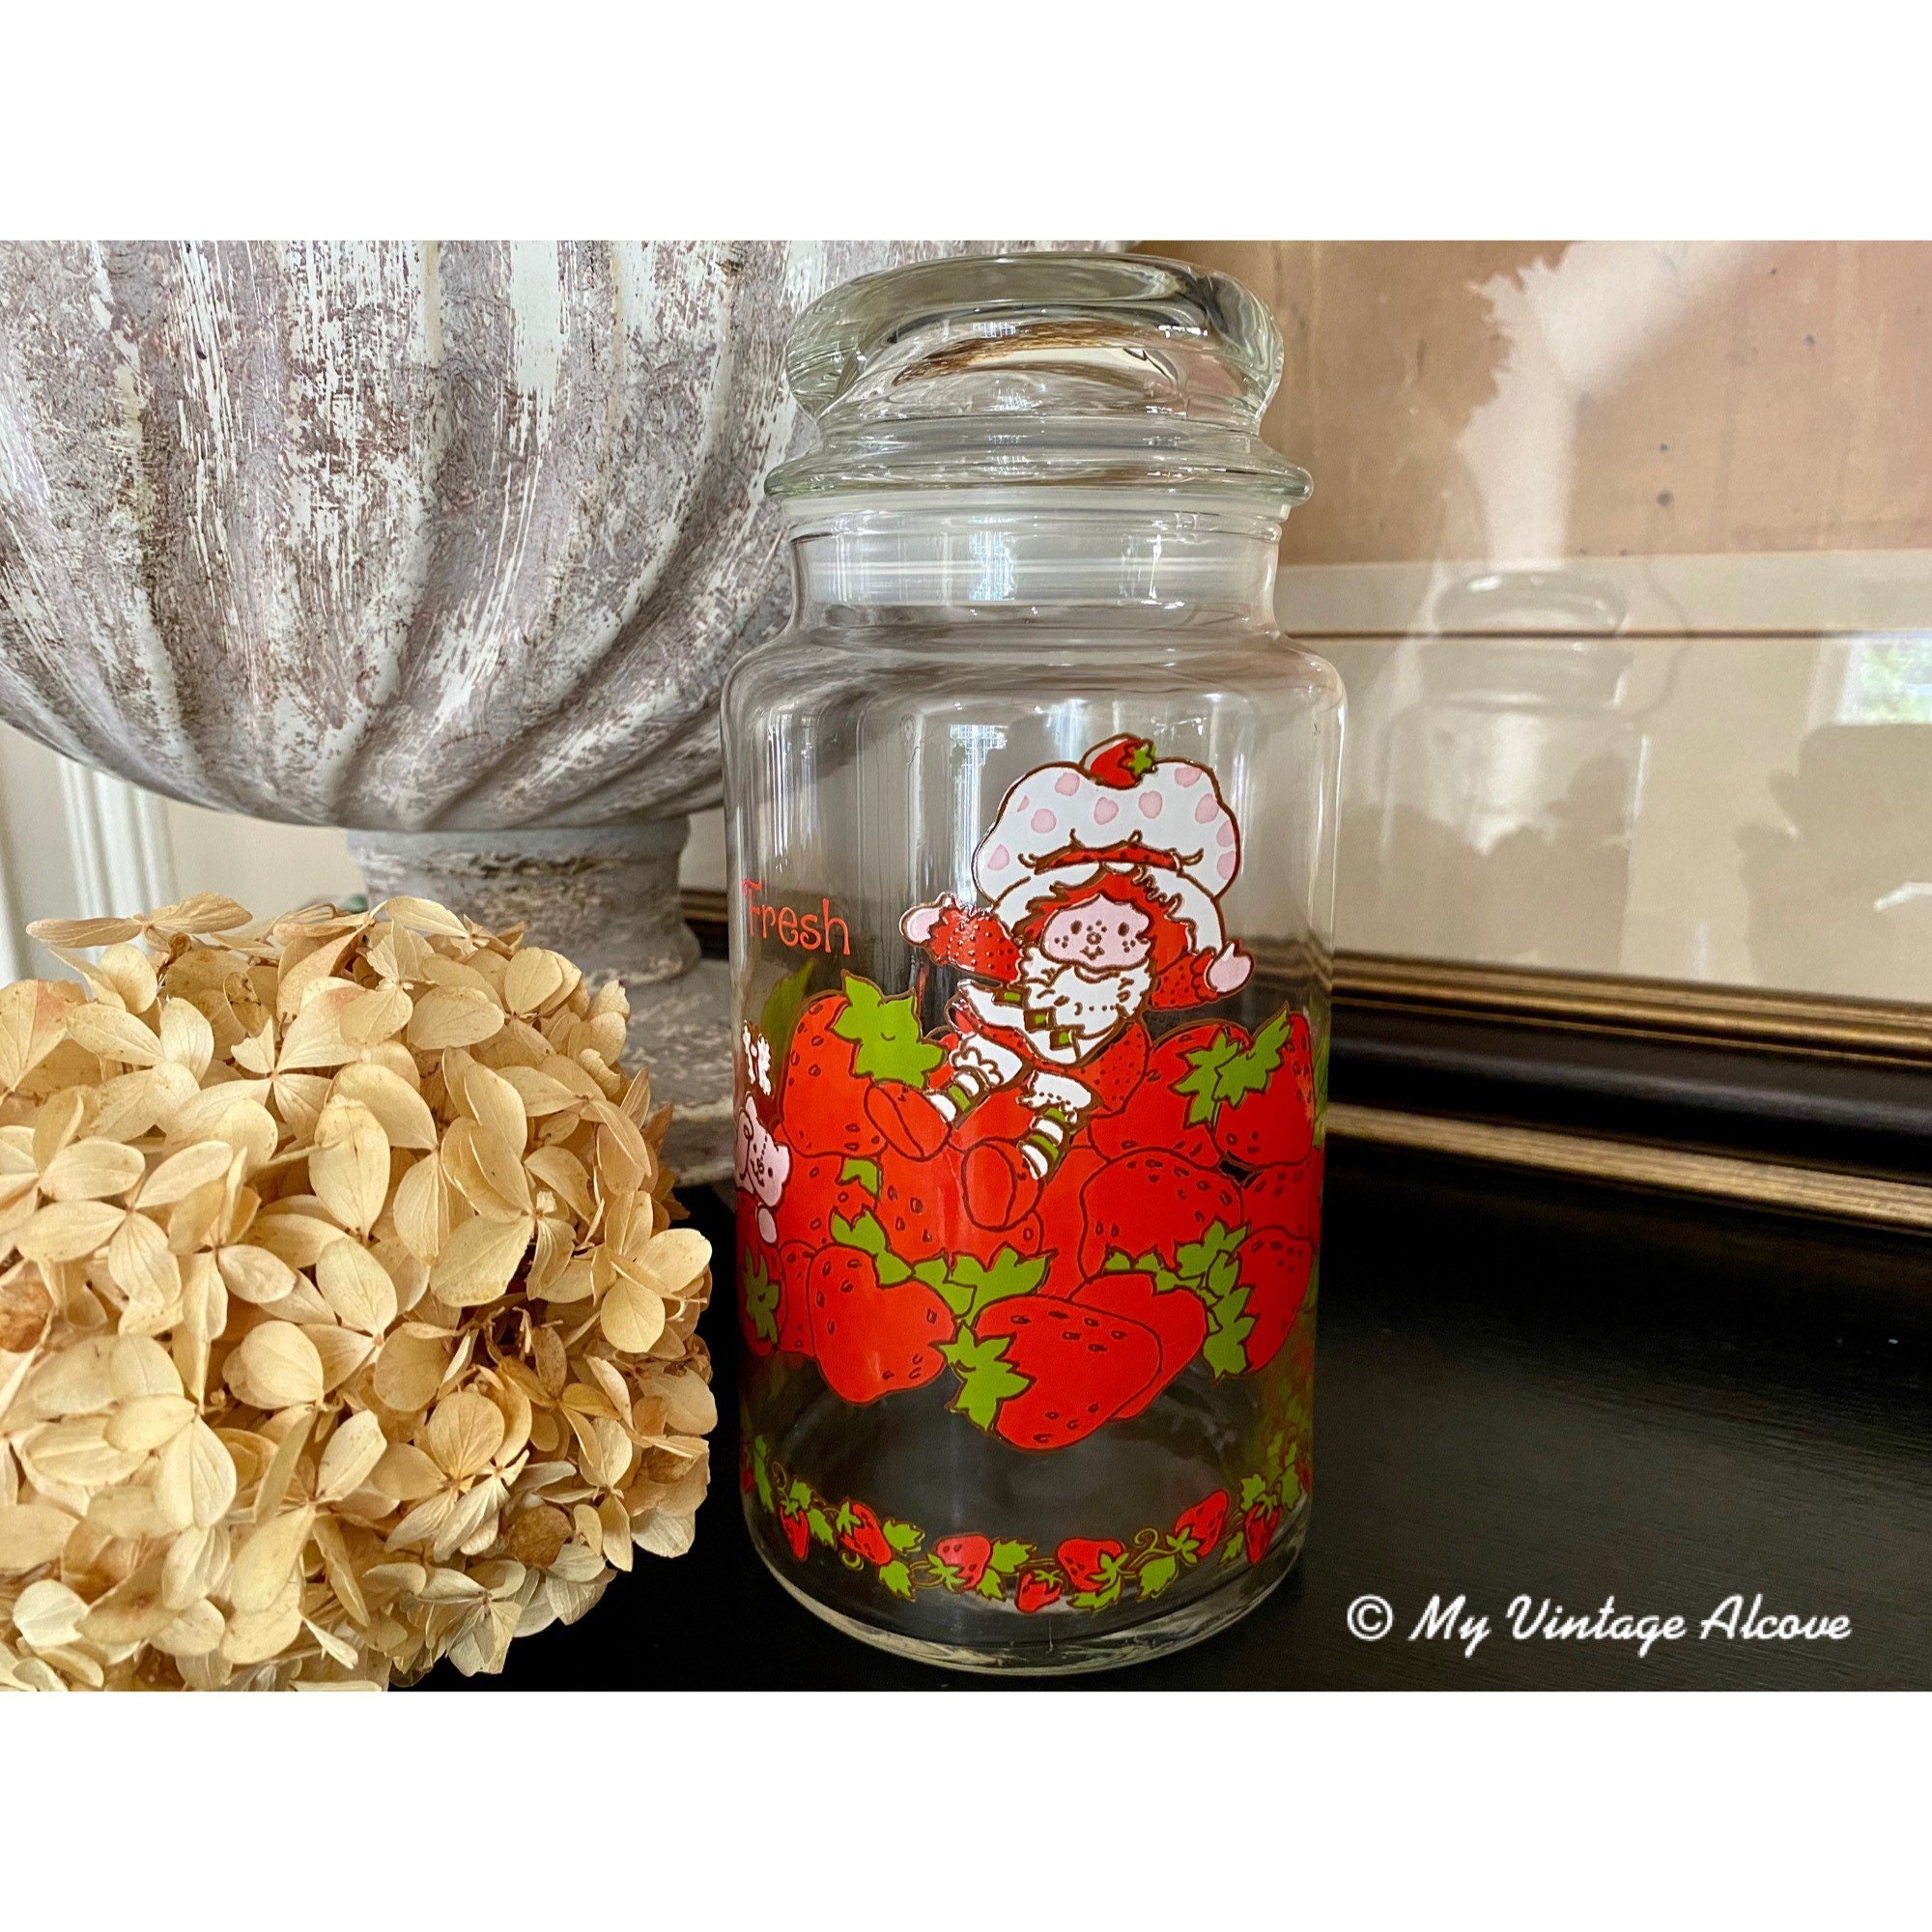 Small Airtight Jam Jar Hand Painted With Strawberry and Flower